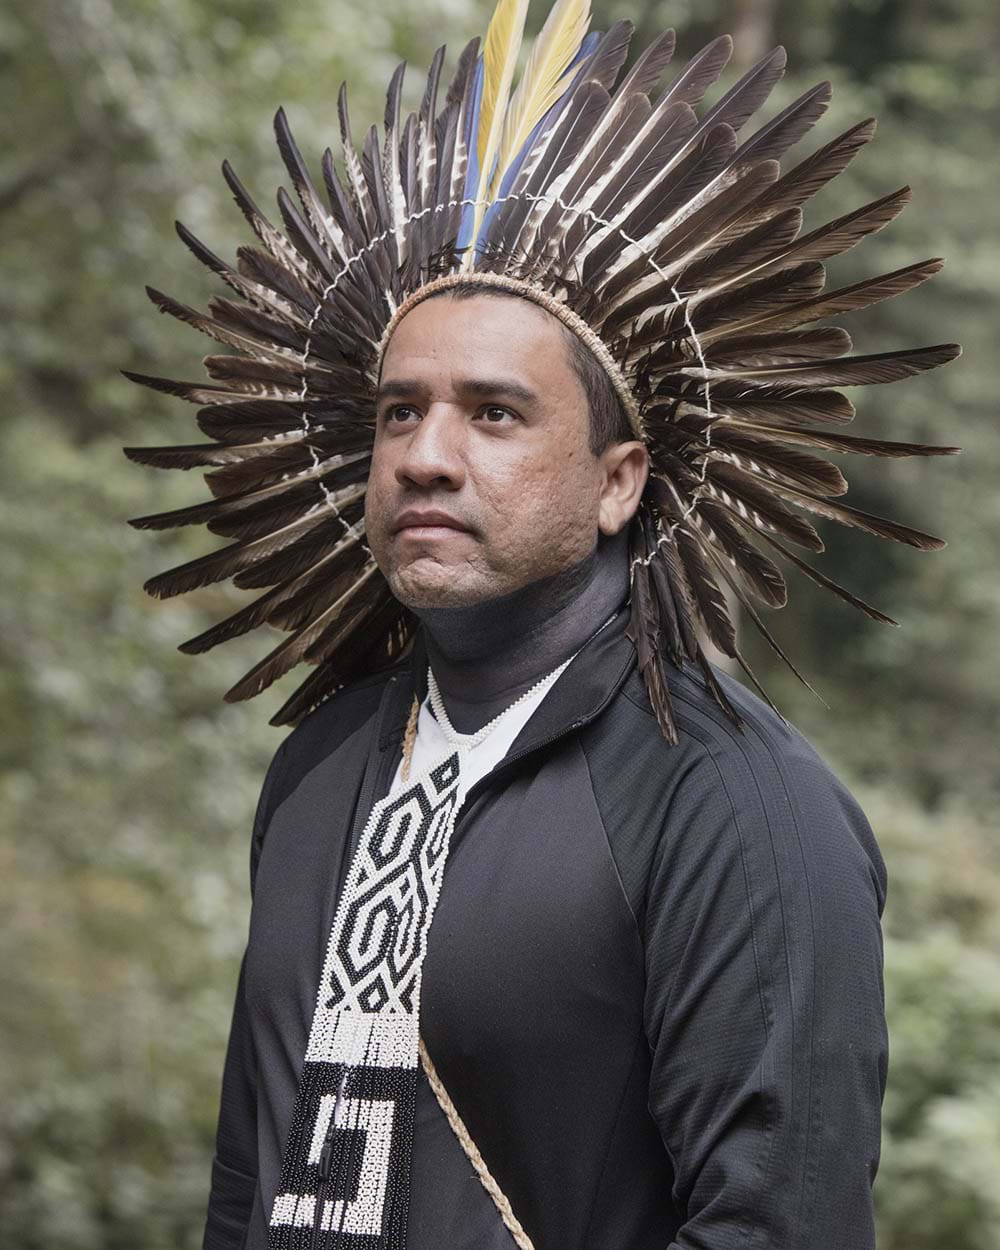 An Indigenous Brazilian man wearing a traditional feather headdress and bead necklace over a black long sleeve shirt in front of trees.